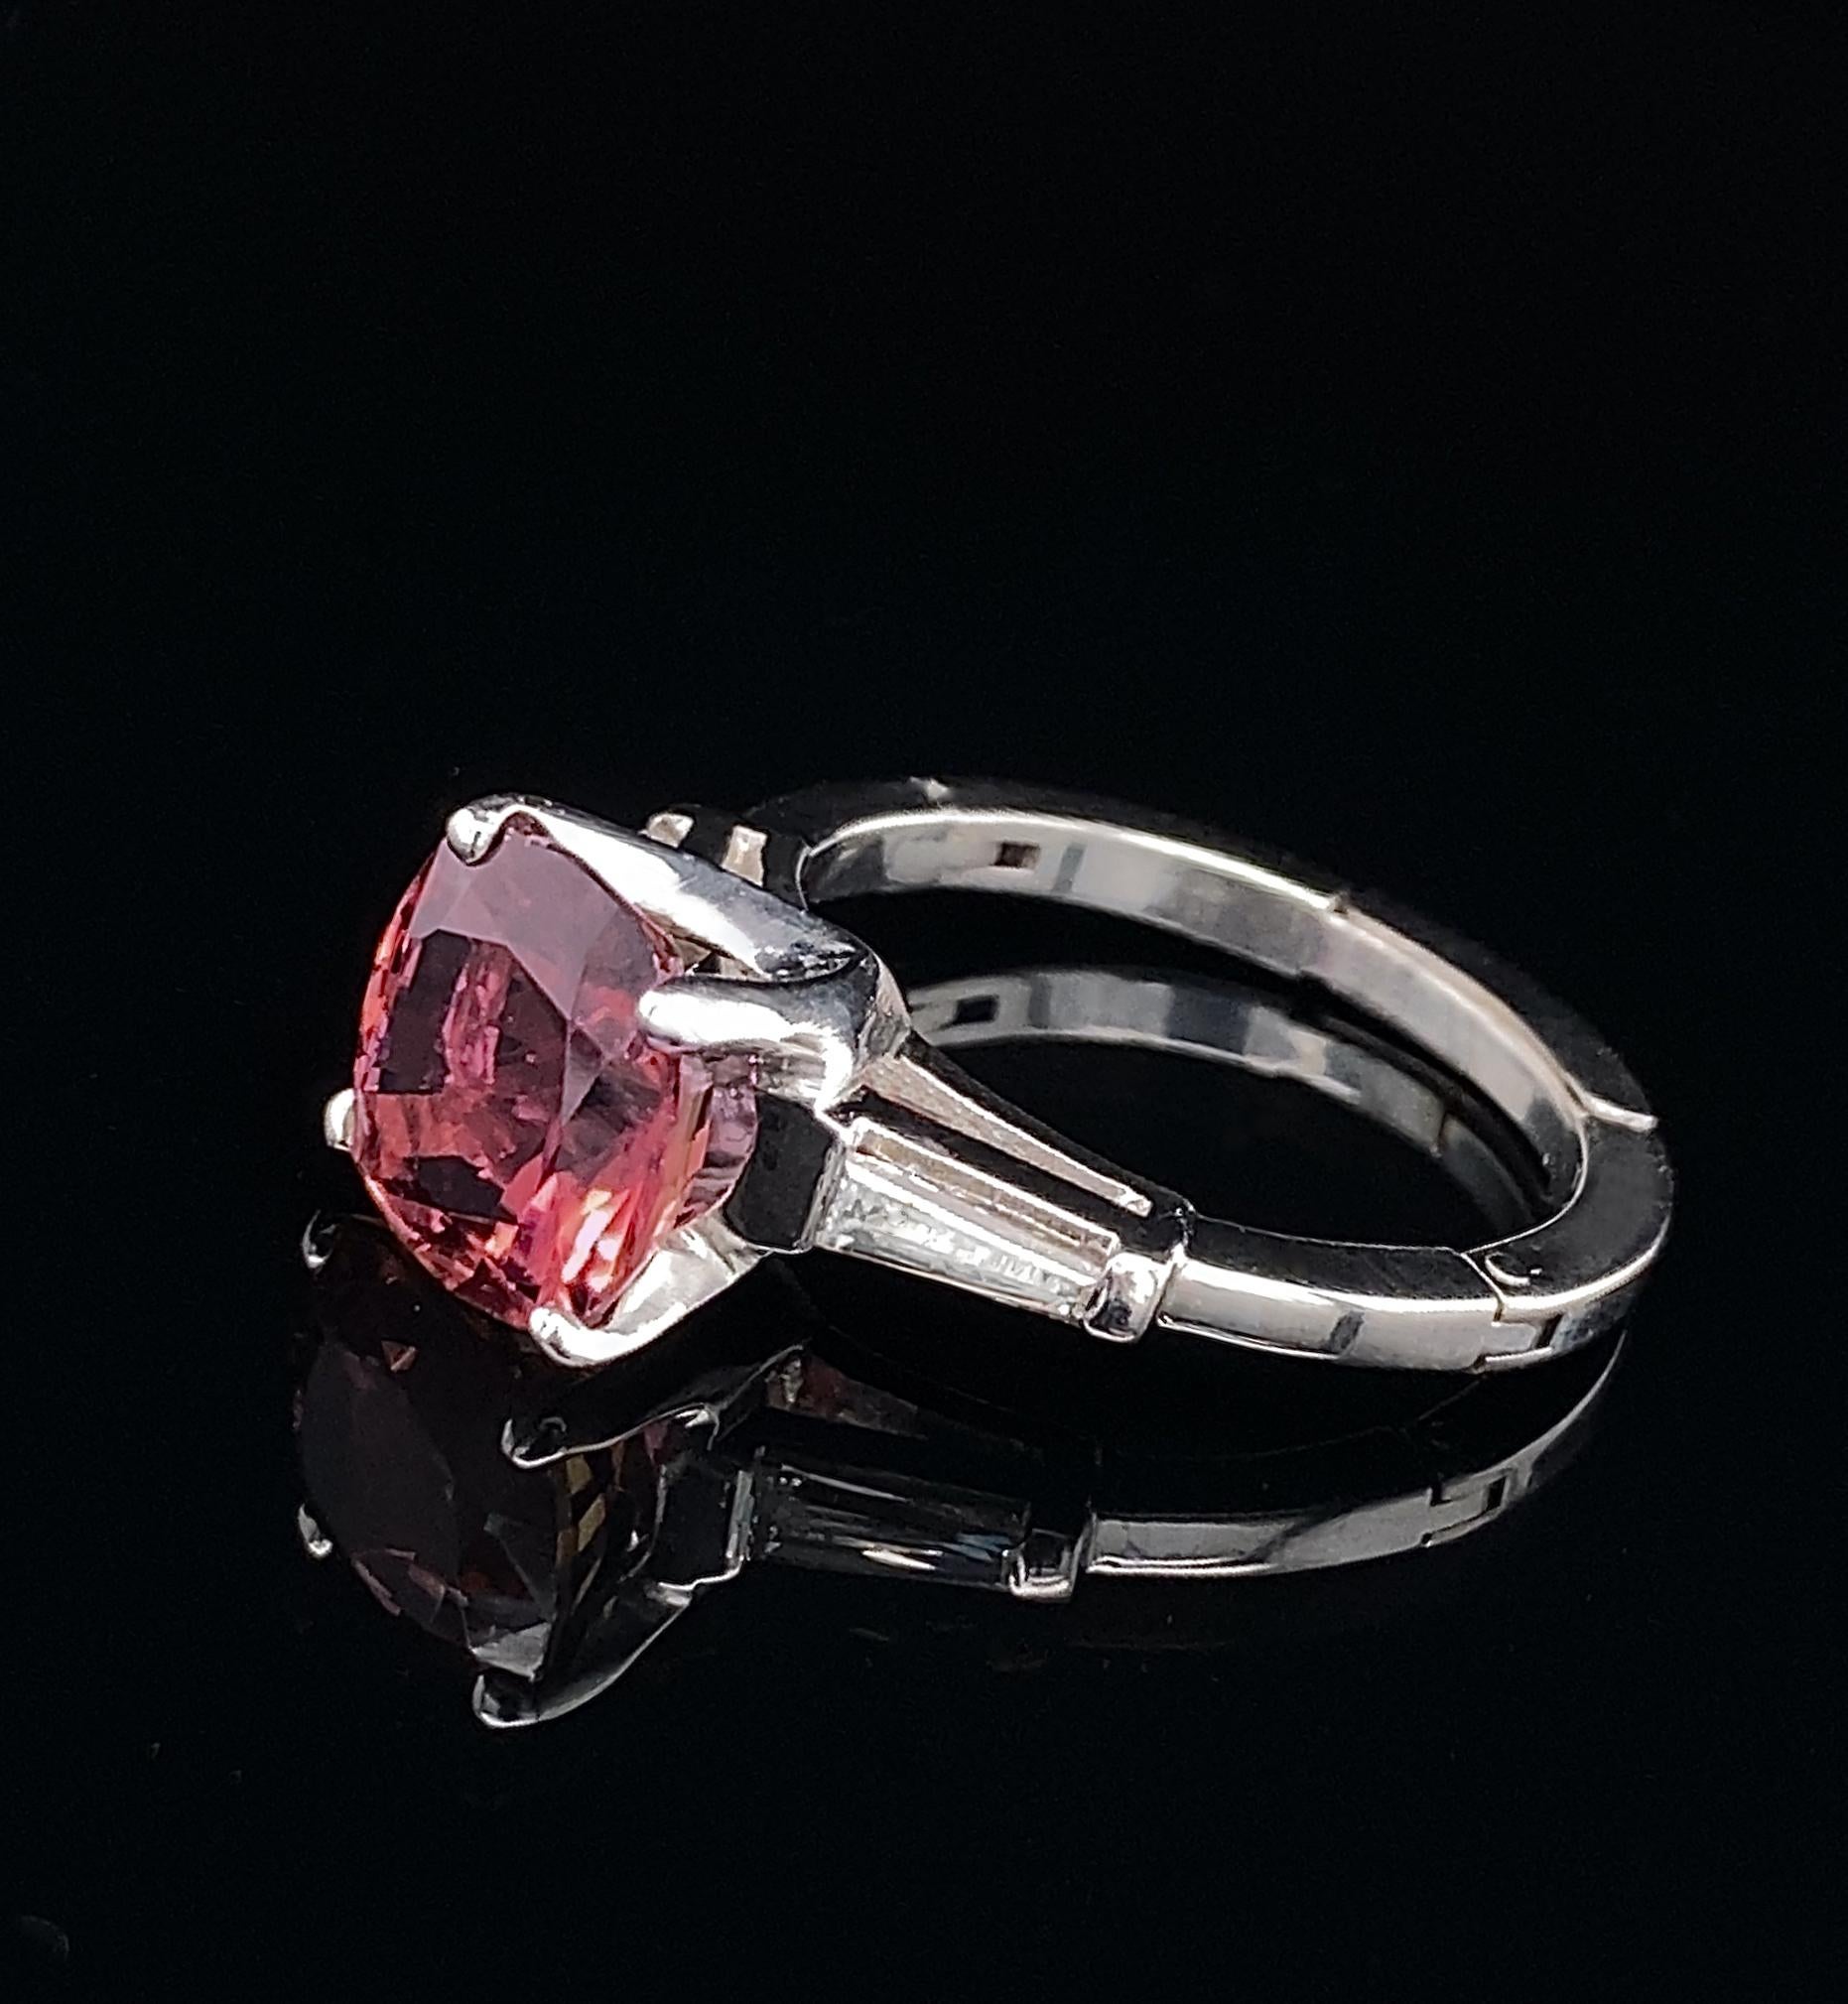 2.9 Carat Pink Tourmaline Engagement Ring with Baguettes in Platinum & Gold For Sale 2